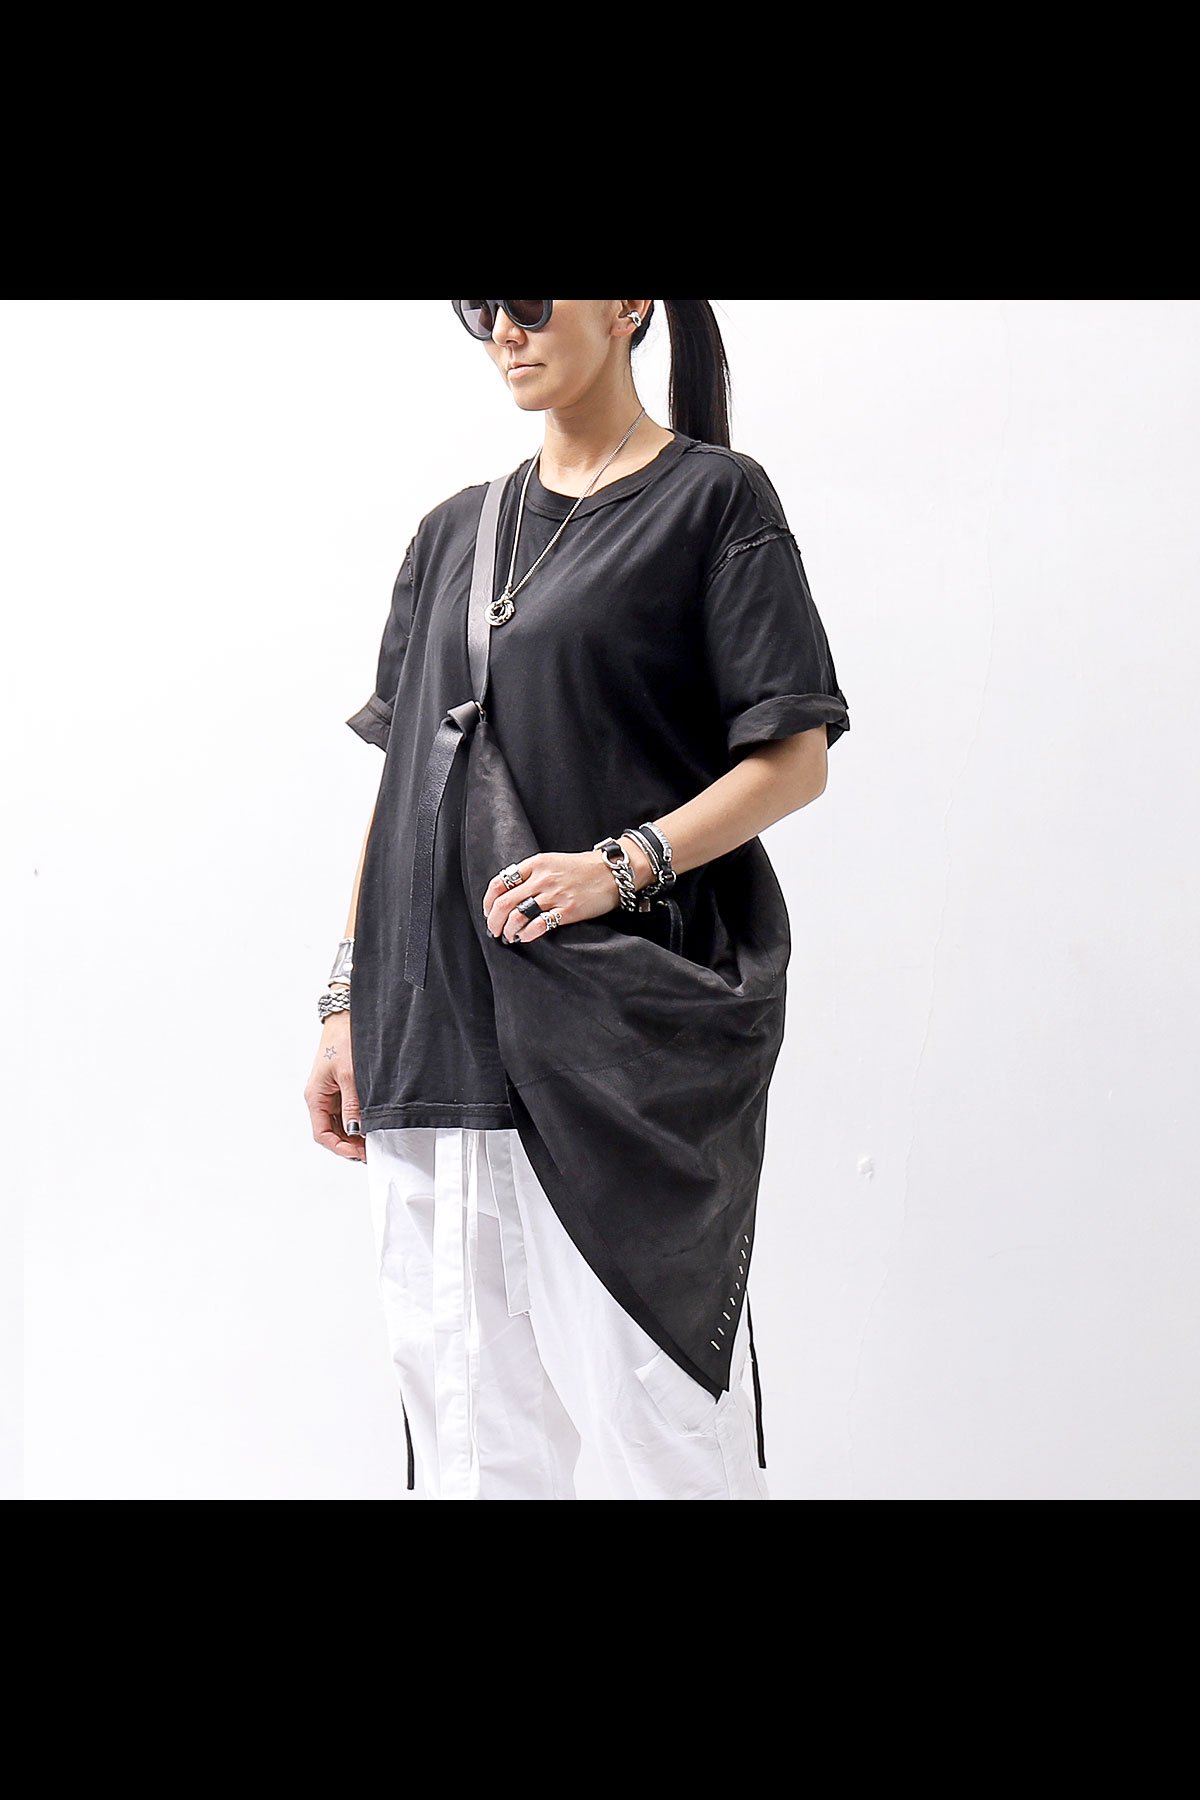 <img class='new_mark_img1' src='https://img.shop-pro.jp/img/new/icons8.gif' style='border:none;display:inline;margin:0px;padding:0px;width:auto;' />UNISEX COVERED 2WAY BODY&SHOULDER BAG_BLACK